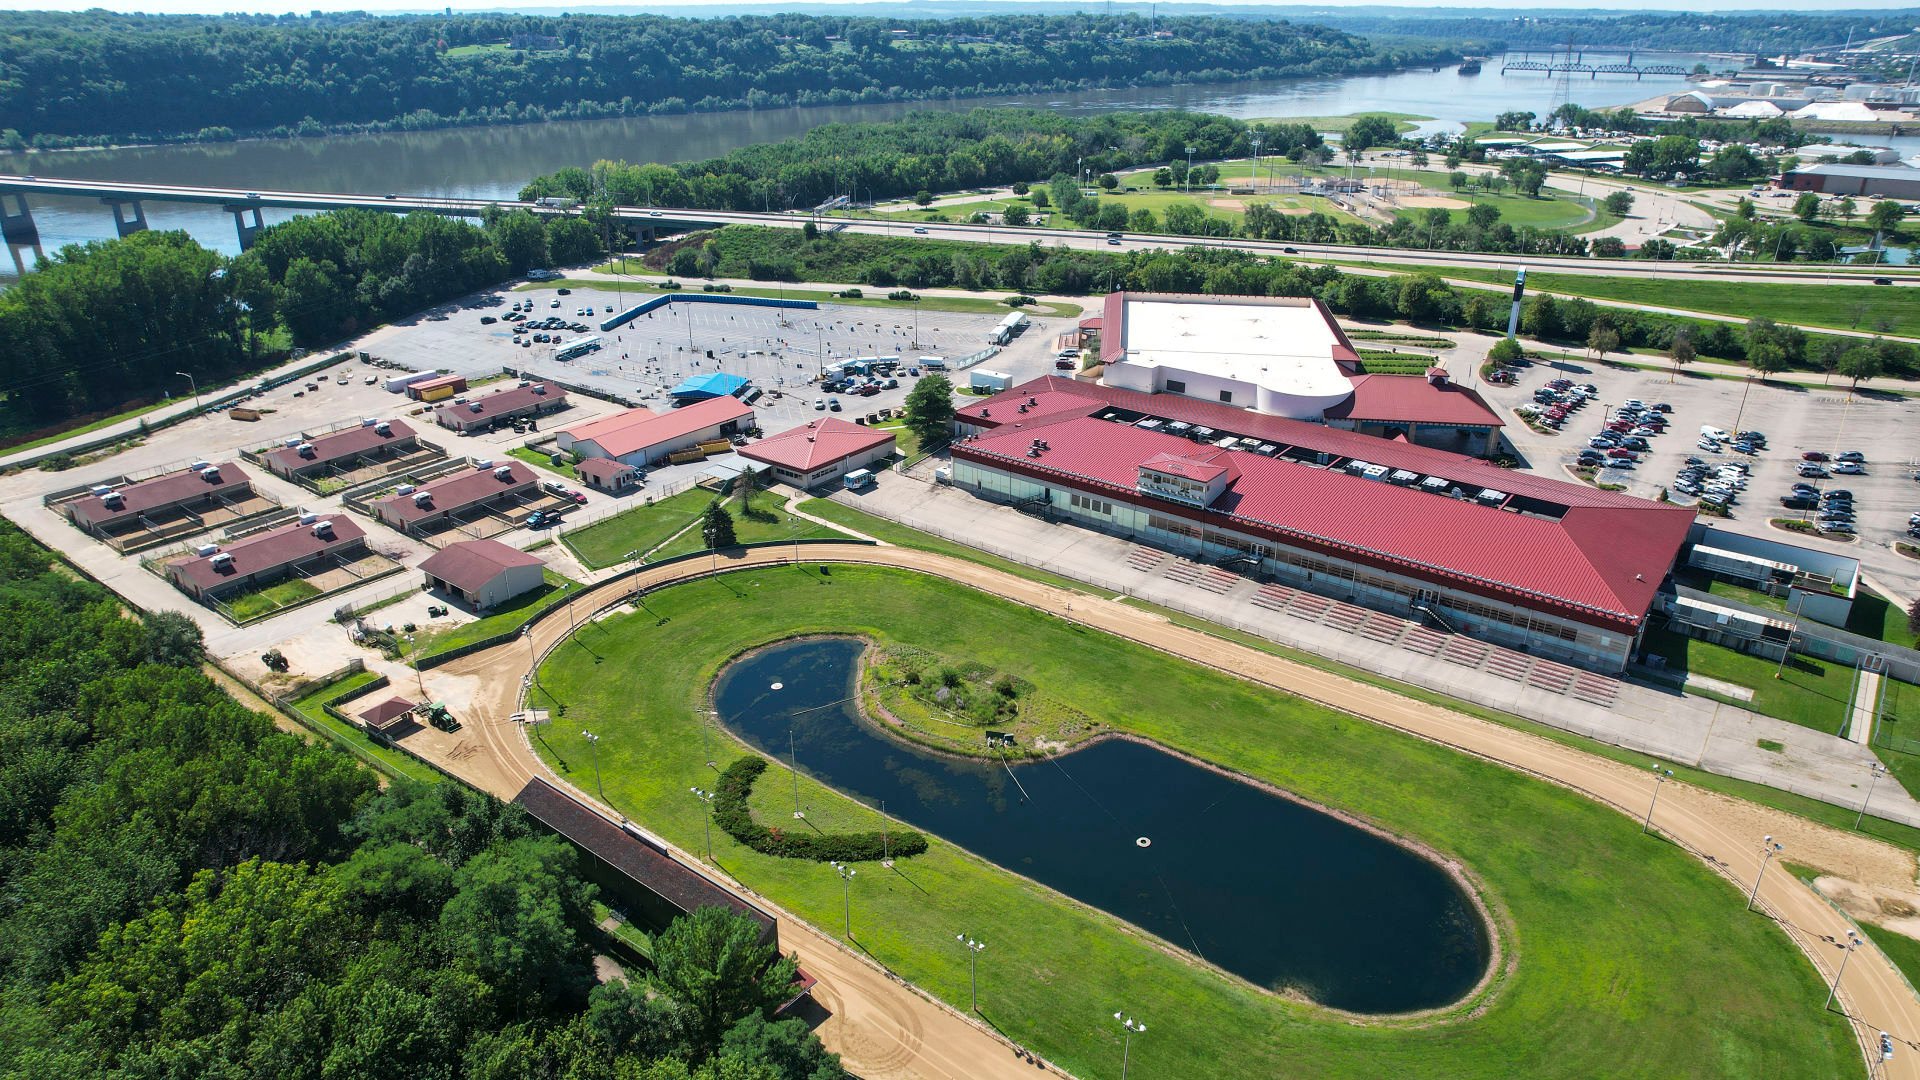 The development of Schmitt Island is a top priority for the Dubuque Racing Association now that the greyhound track has closed and opportunities present themselves to turn the island into a destination point.    PHOTO CREDIT: Dave Kettering